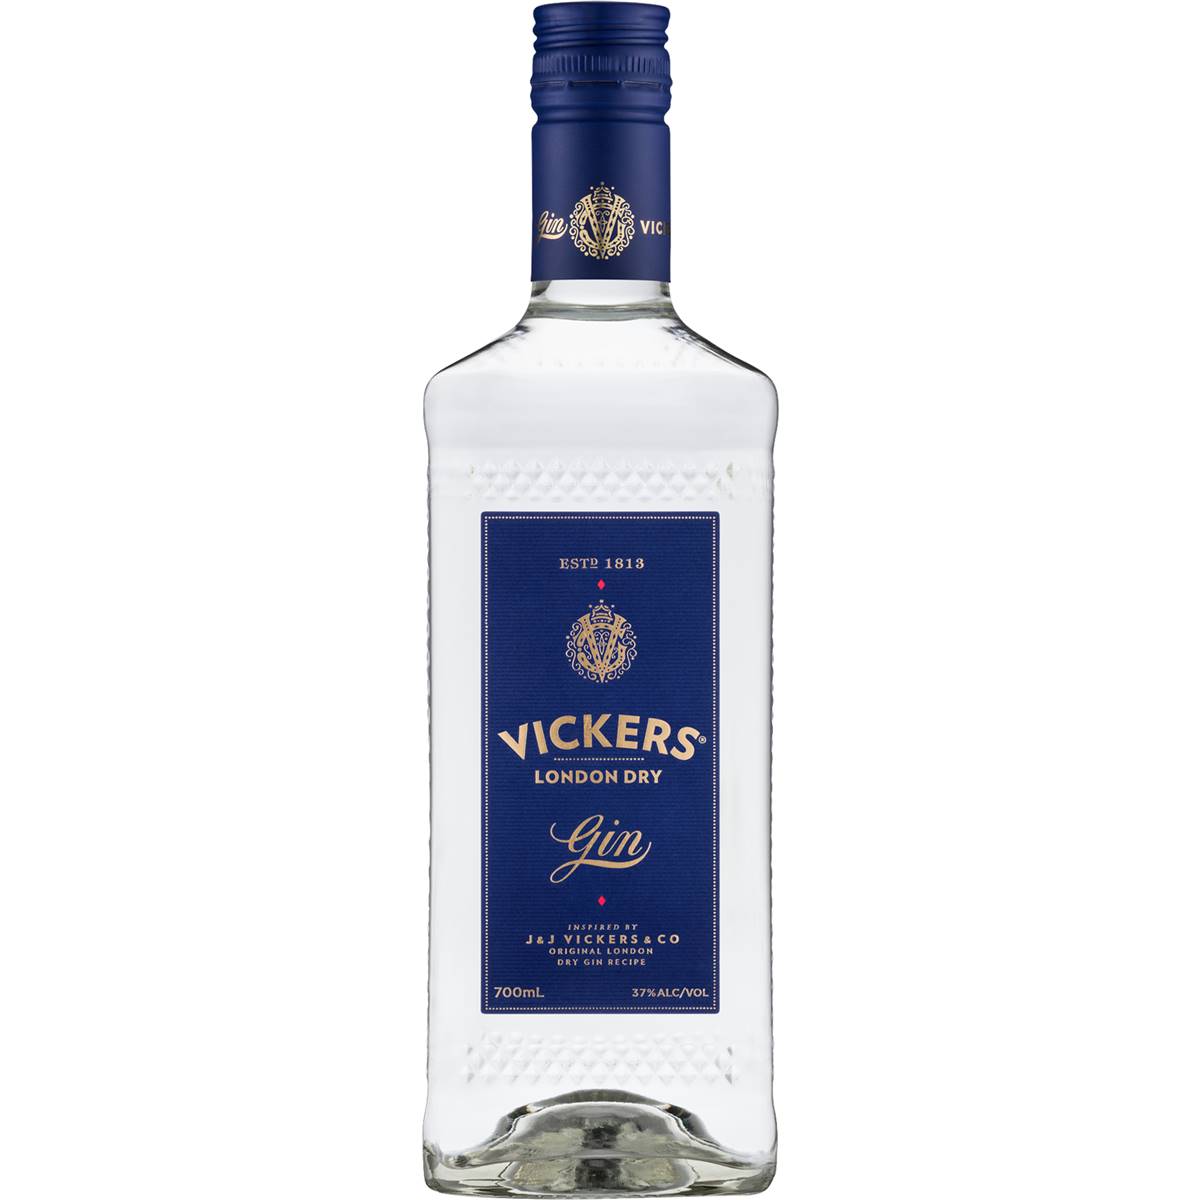 Calories in Vickers London Dry Gin